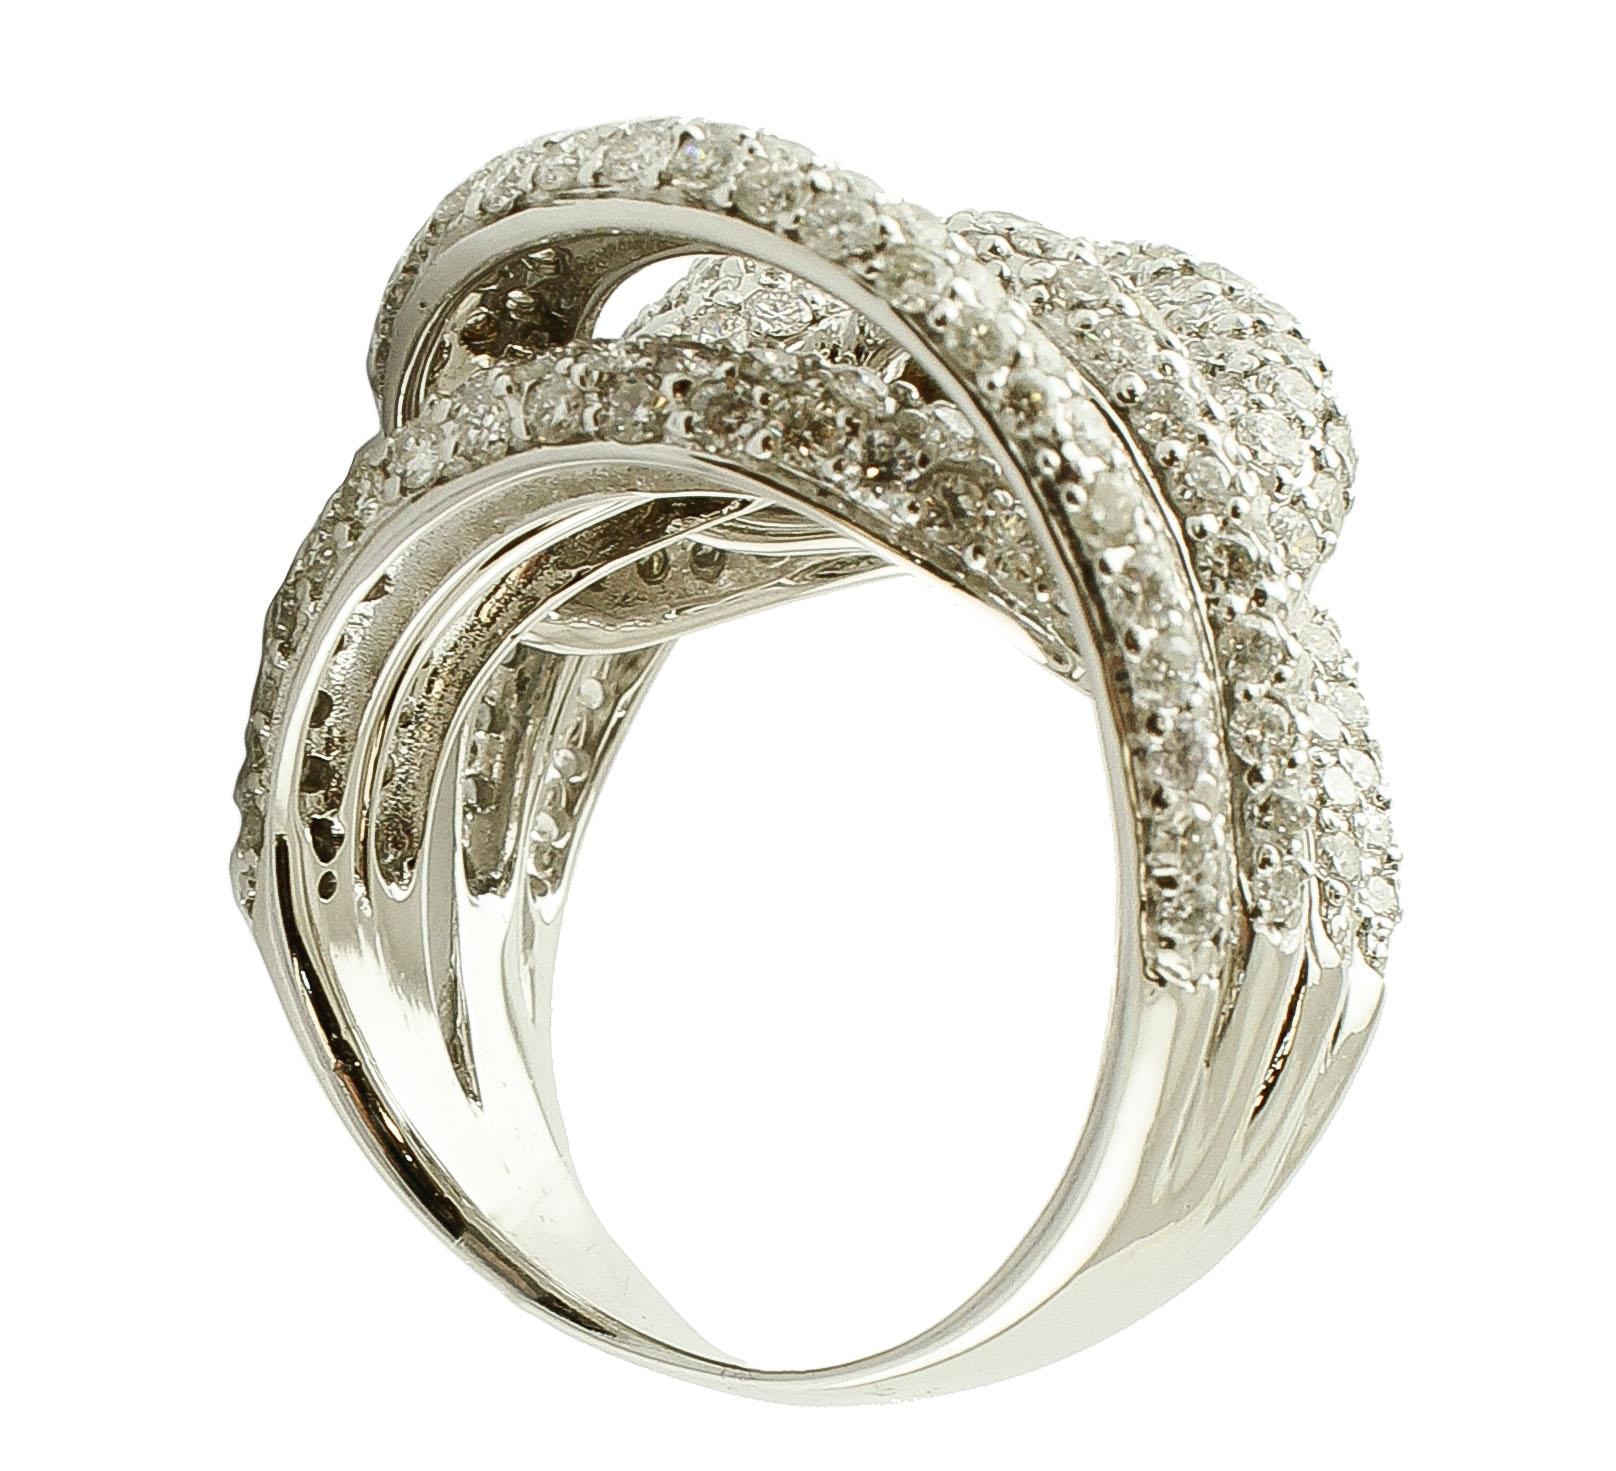 Brilliant Cut Diamonds and 18 Karat White Gold Intertwined Bands Ring For Sale